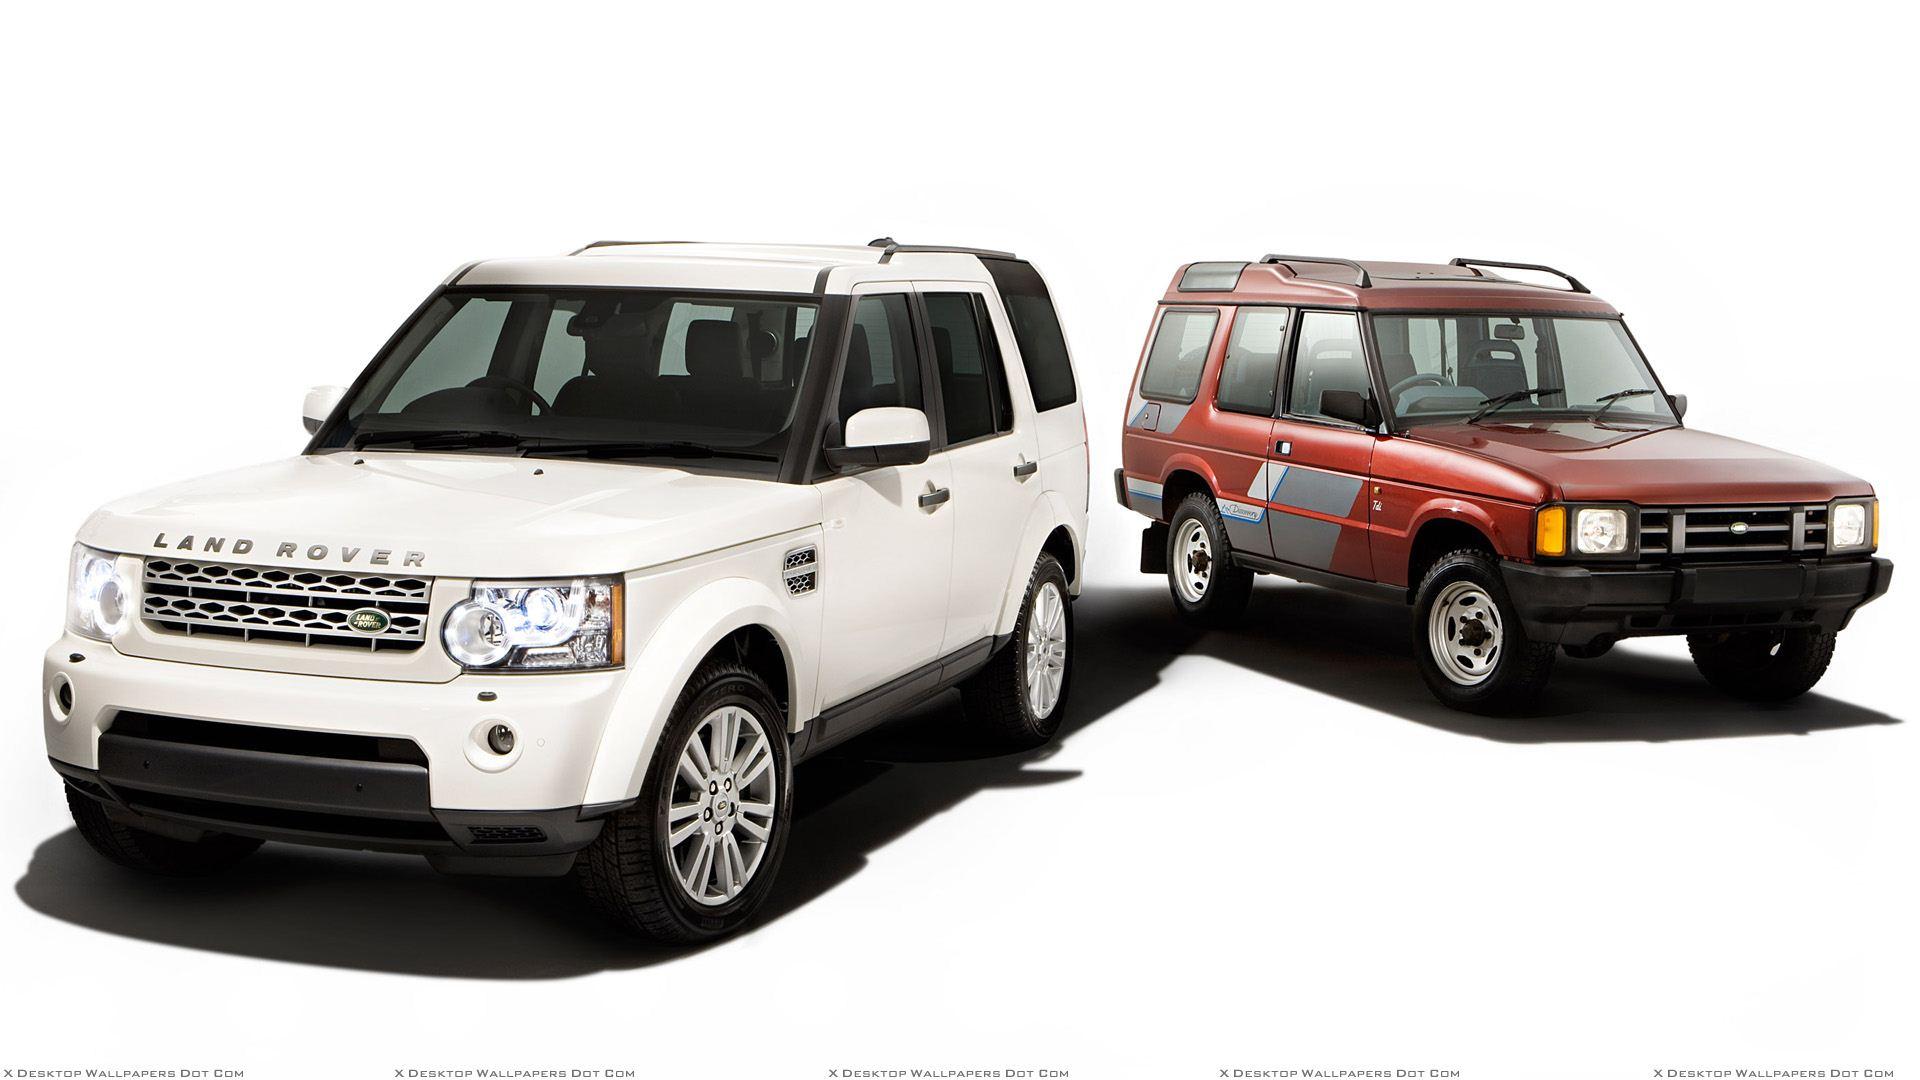 Land Rover Discovery Wallpaper, Photo & Image in HD